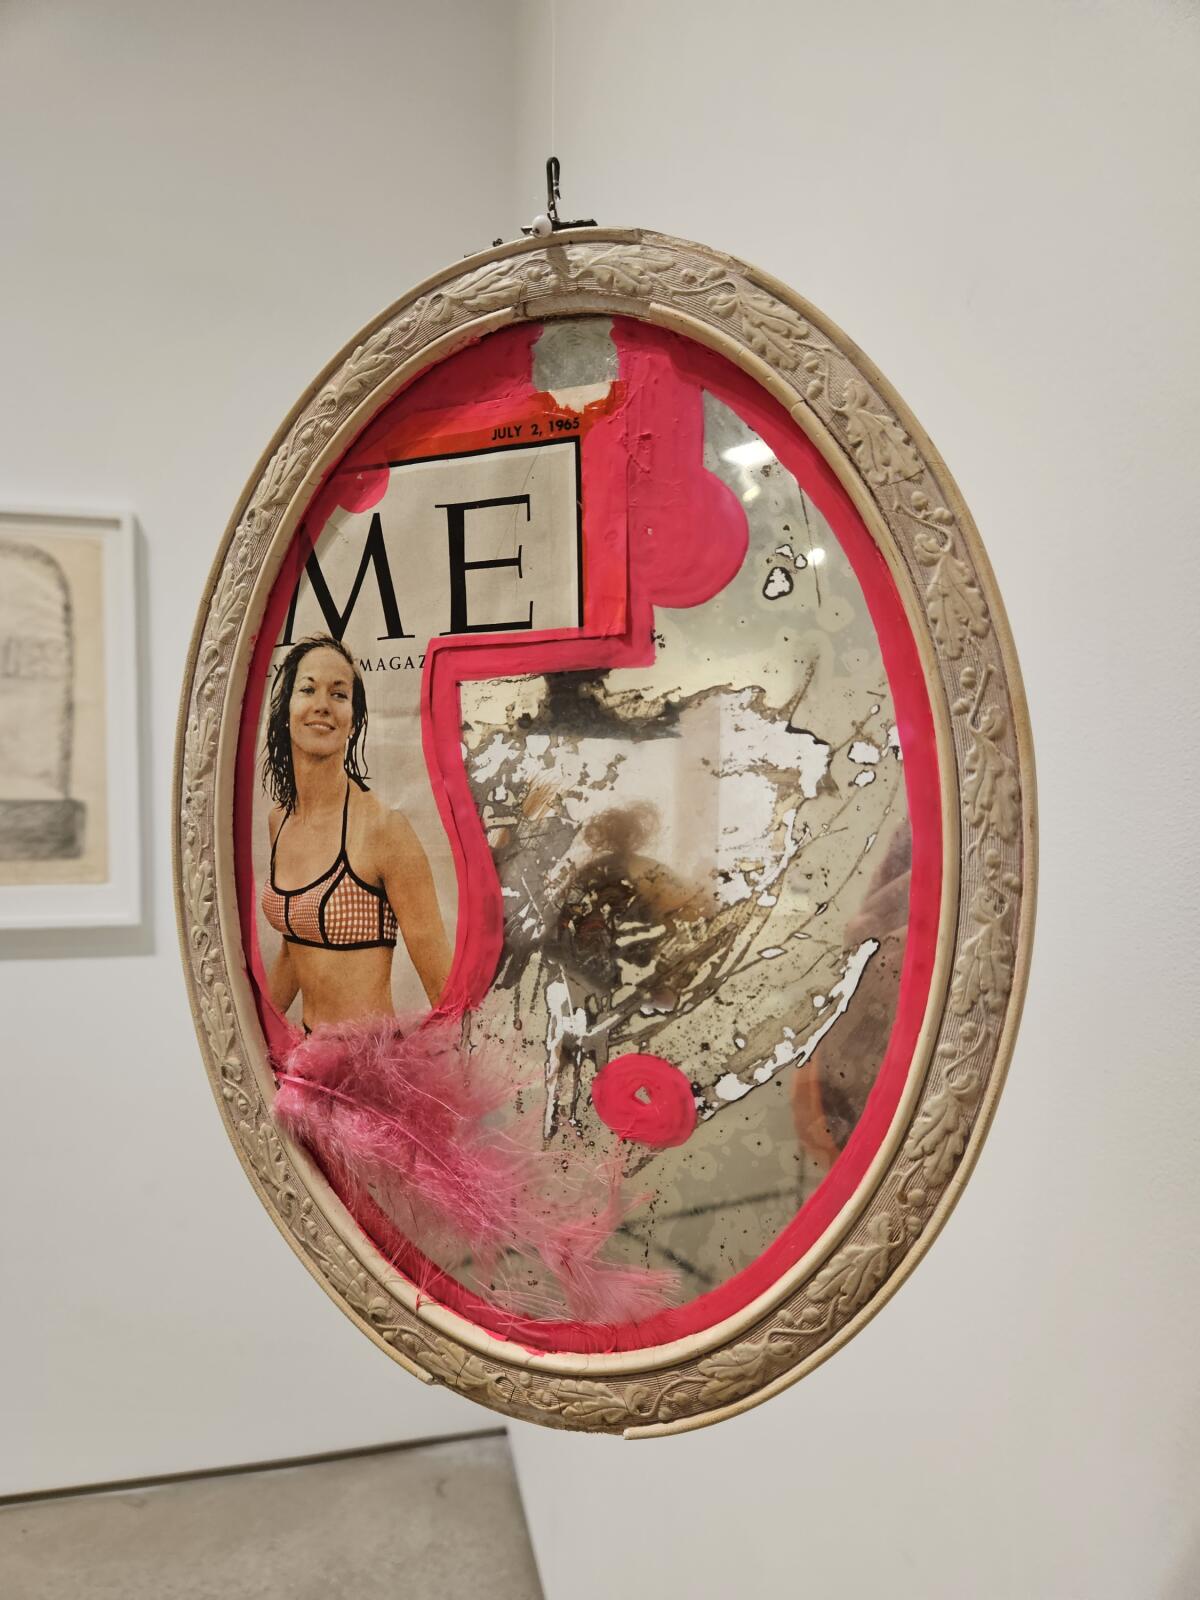 A fragment of a Time magazine cover with the “TI” clipped off, showing a woman in a bikini, pasted on an oval mirror.